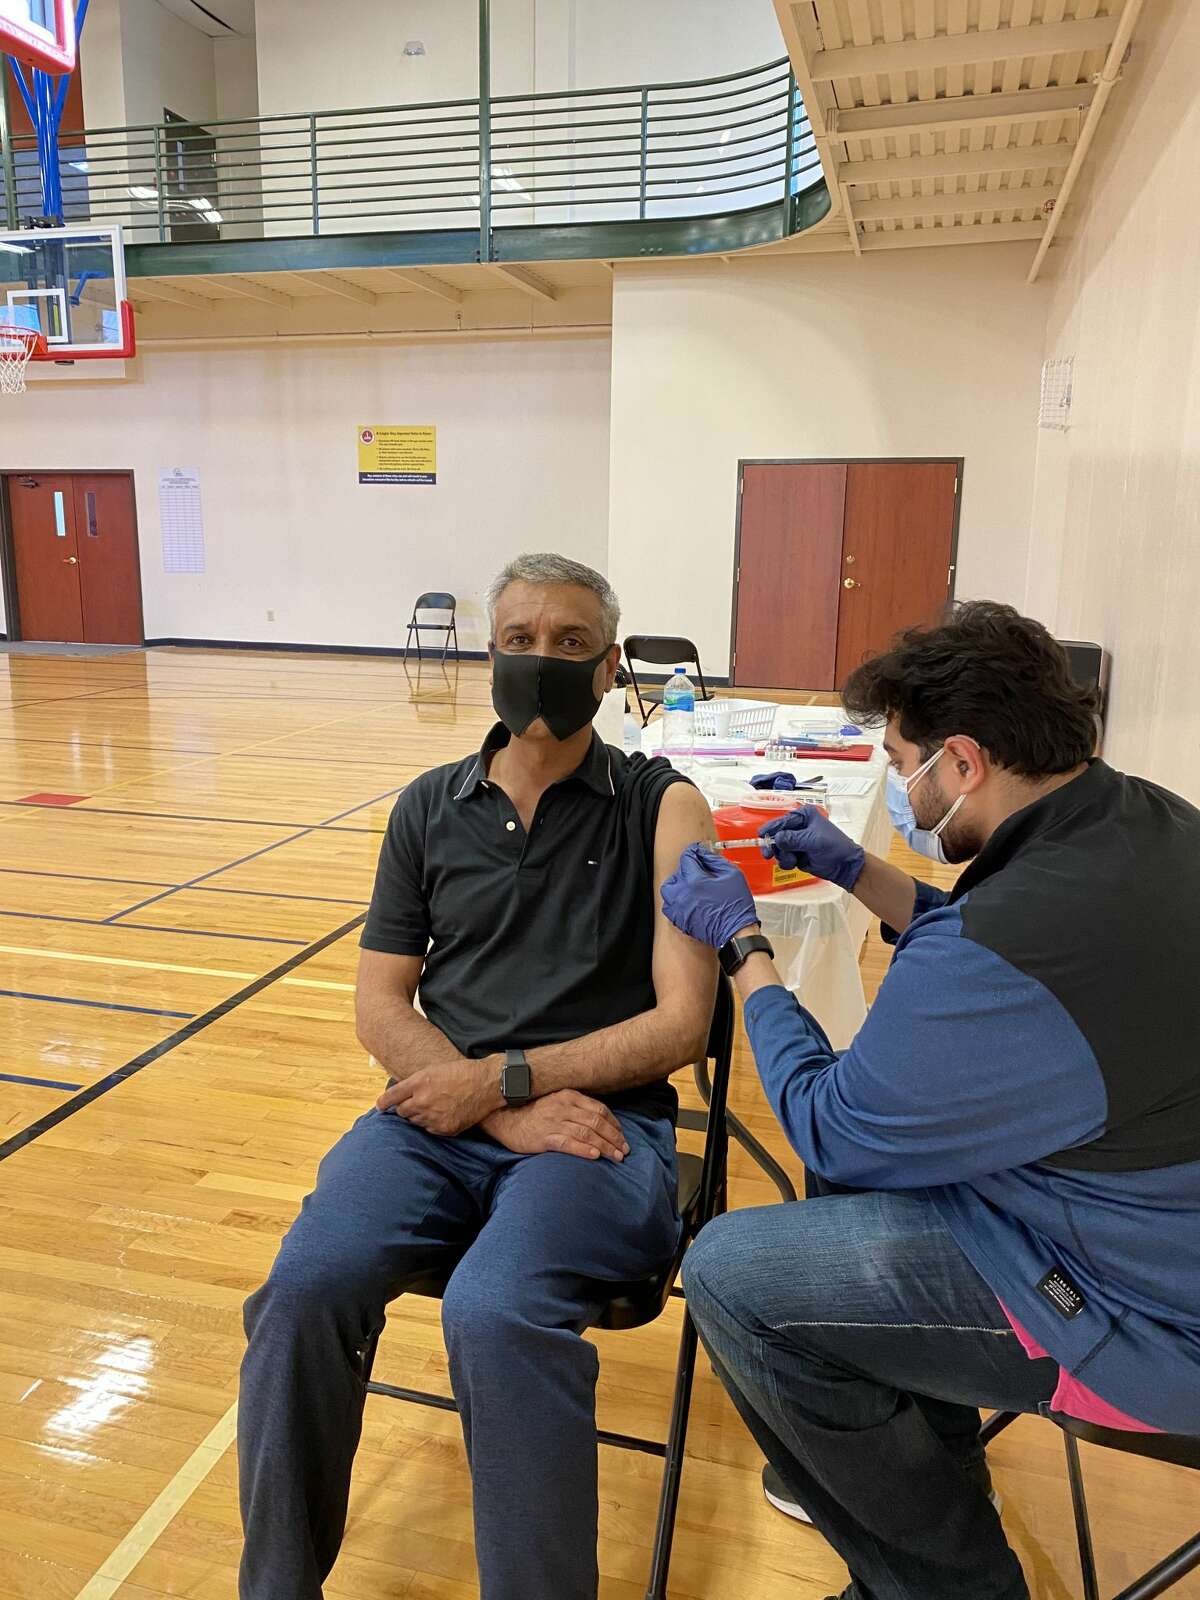 One hundred people, Muslims and non-Muslims, were vaccinated April 10 in the gymnasium at the Islamic Center of the Capital District in Colonie in a joint COVID-19 Vaccination Campaign by the Islamic Center of Capital District,